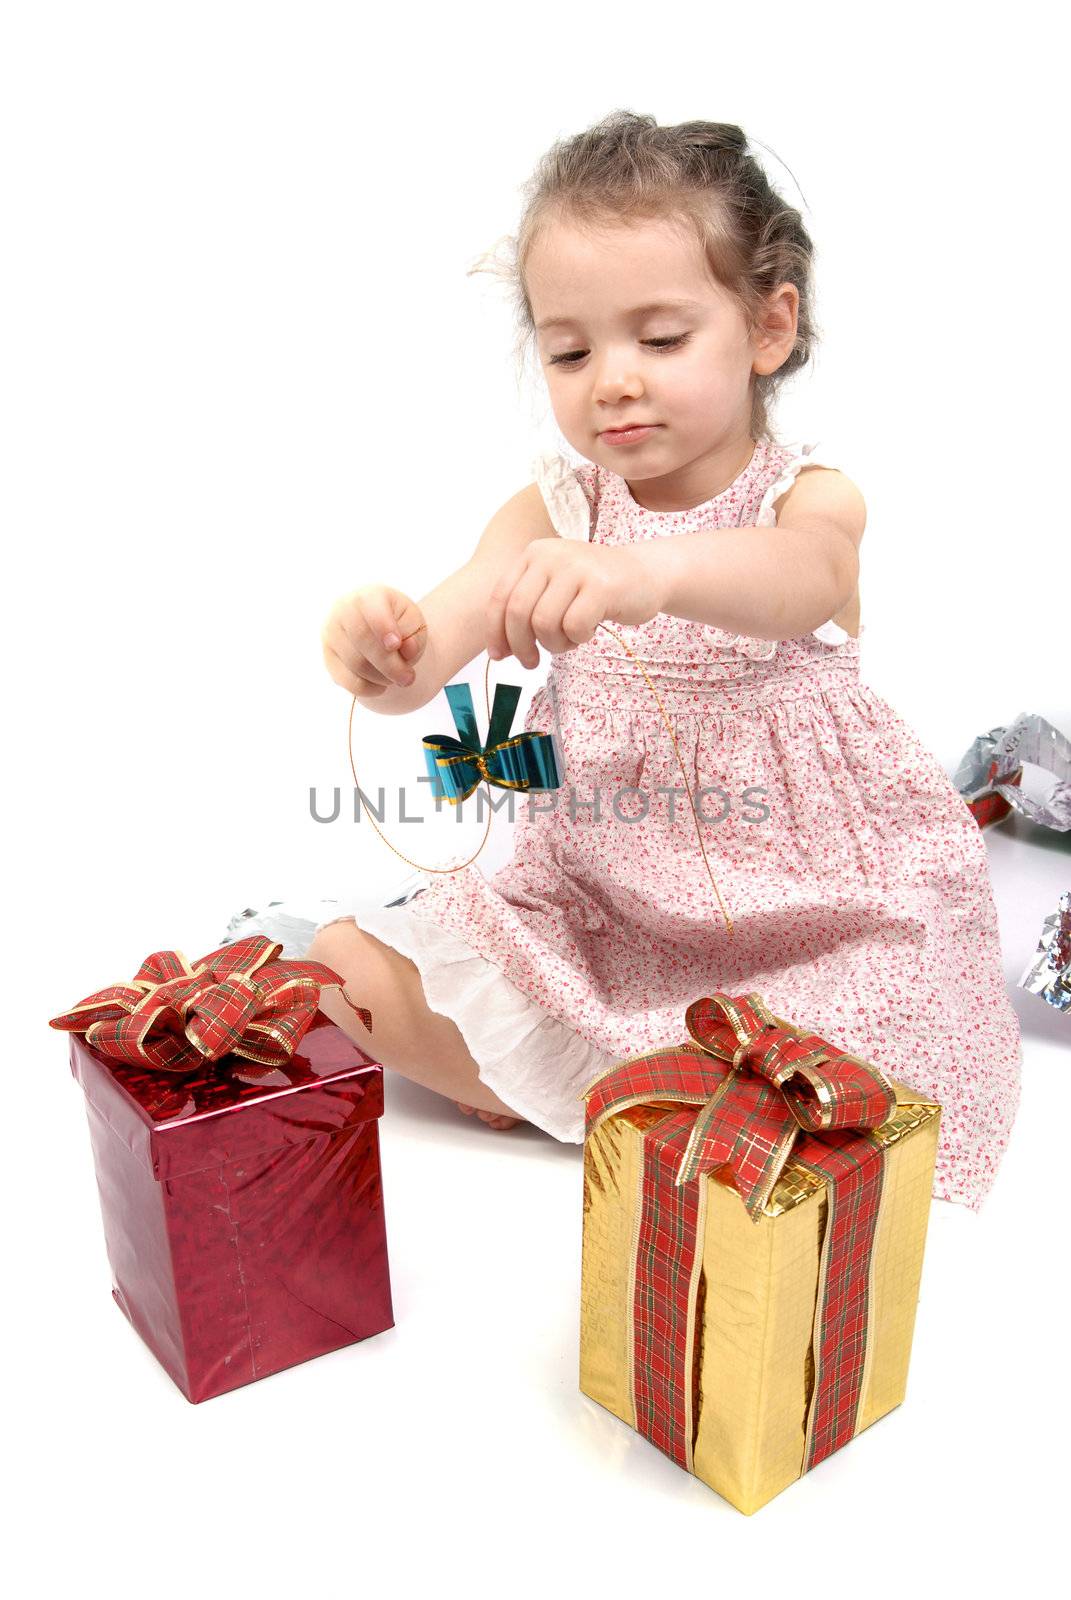 Little girl about to open her Christmas presents, playing with a blue ribbon. White background